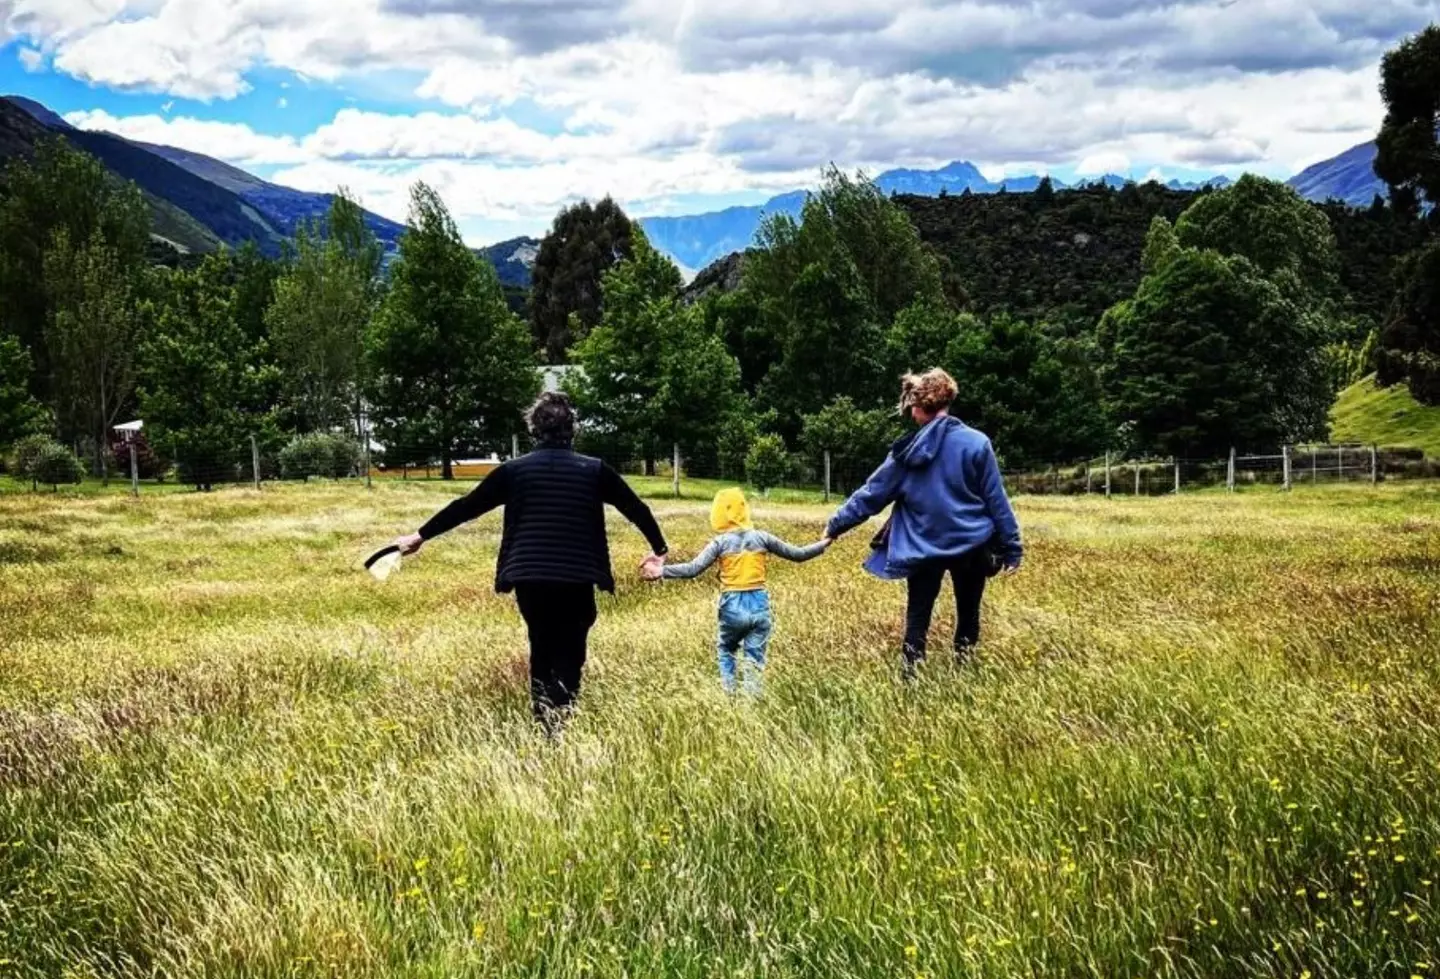 Gaiman and Palmer had welcomed their son in September 2015.